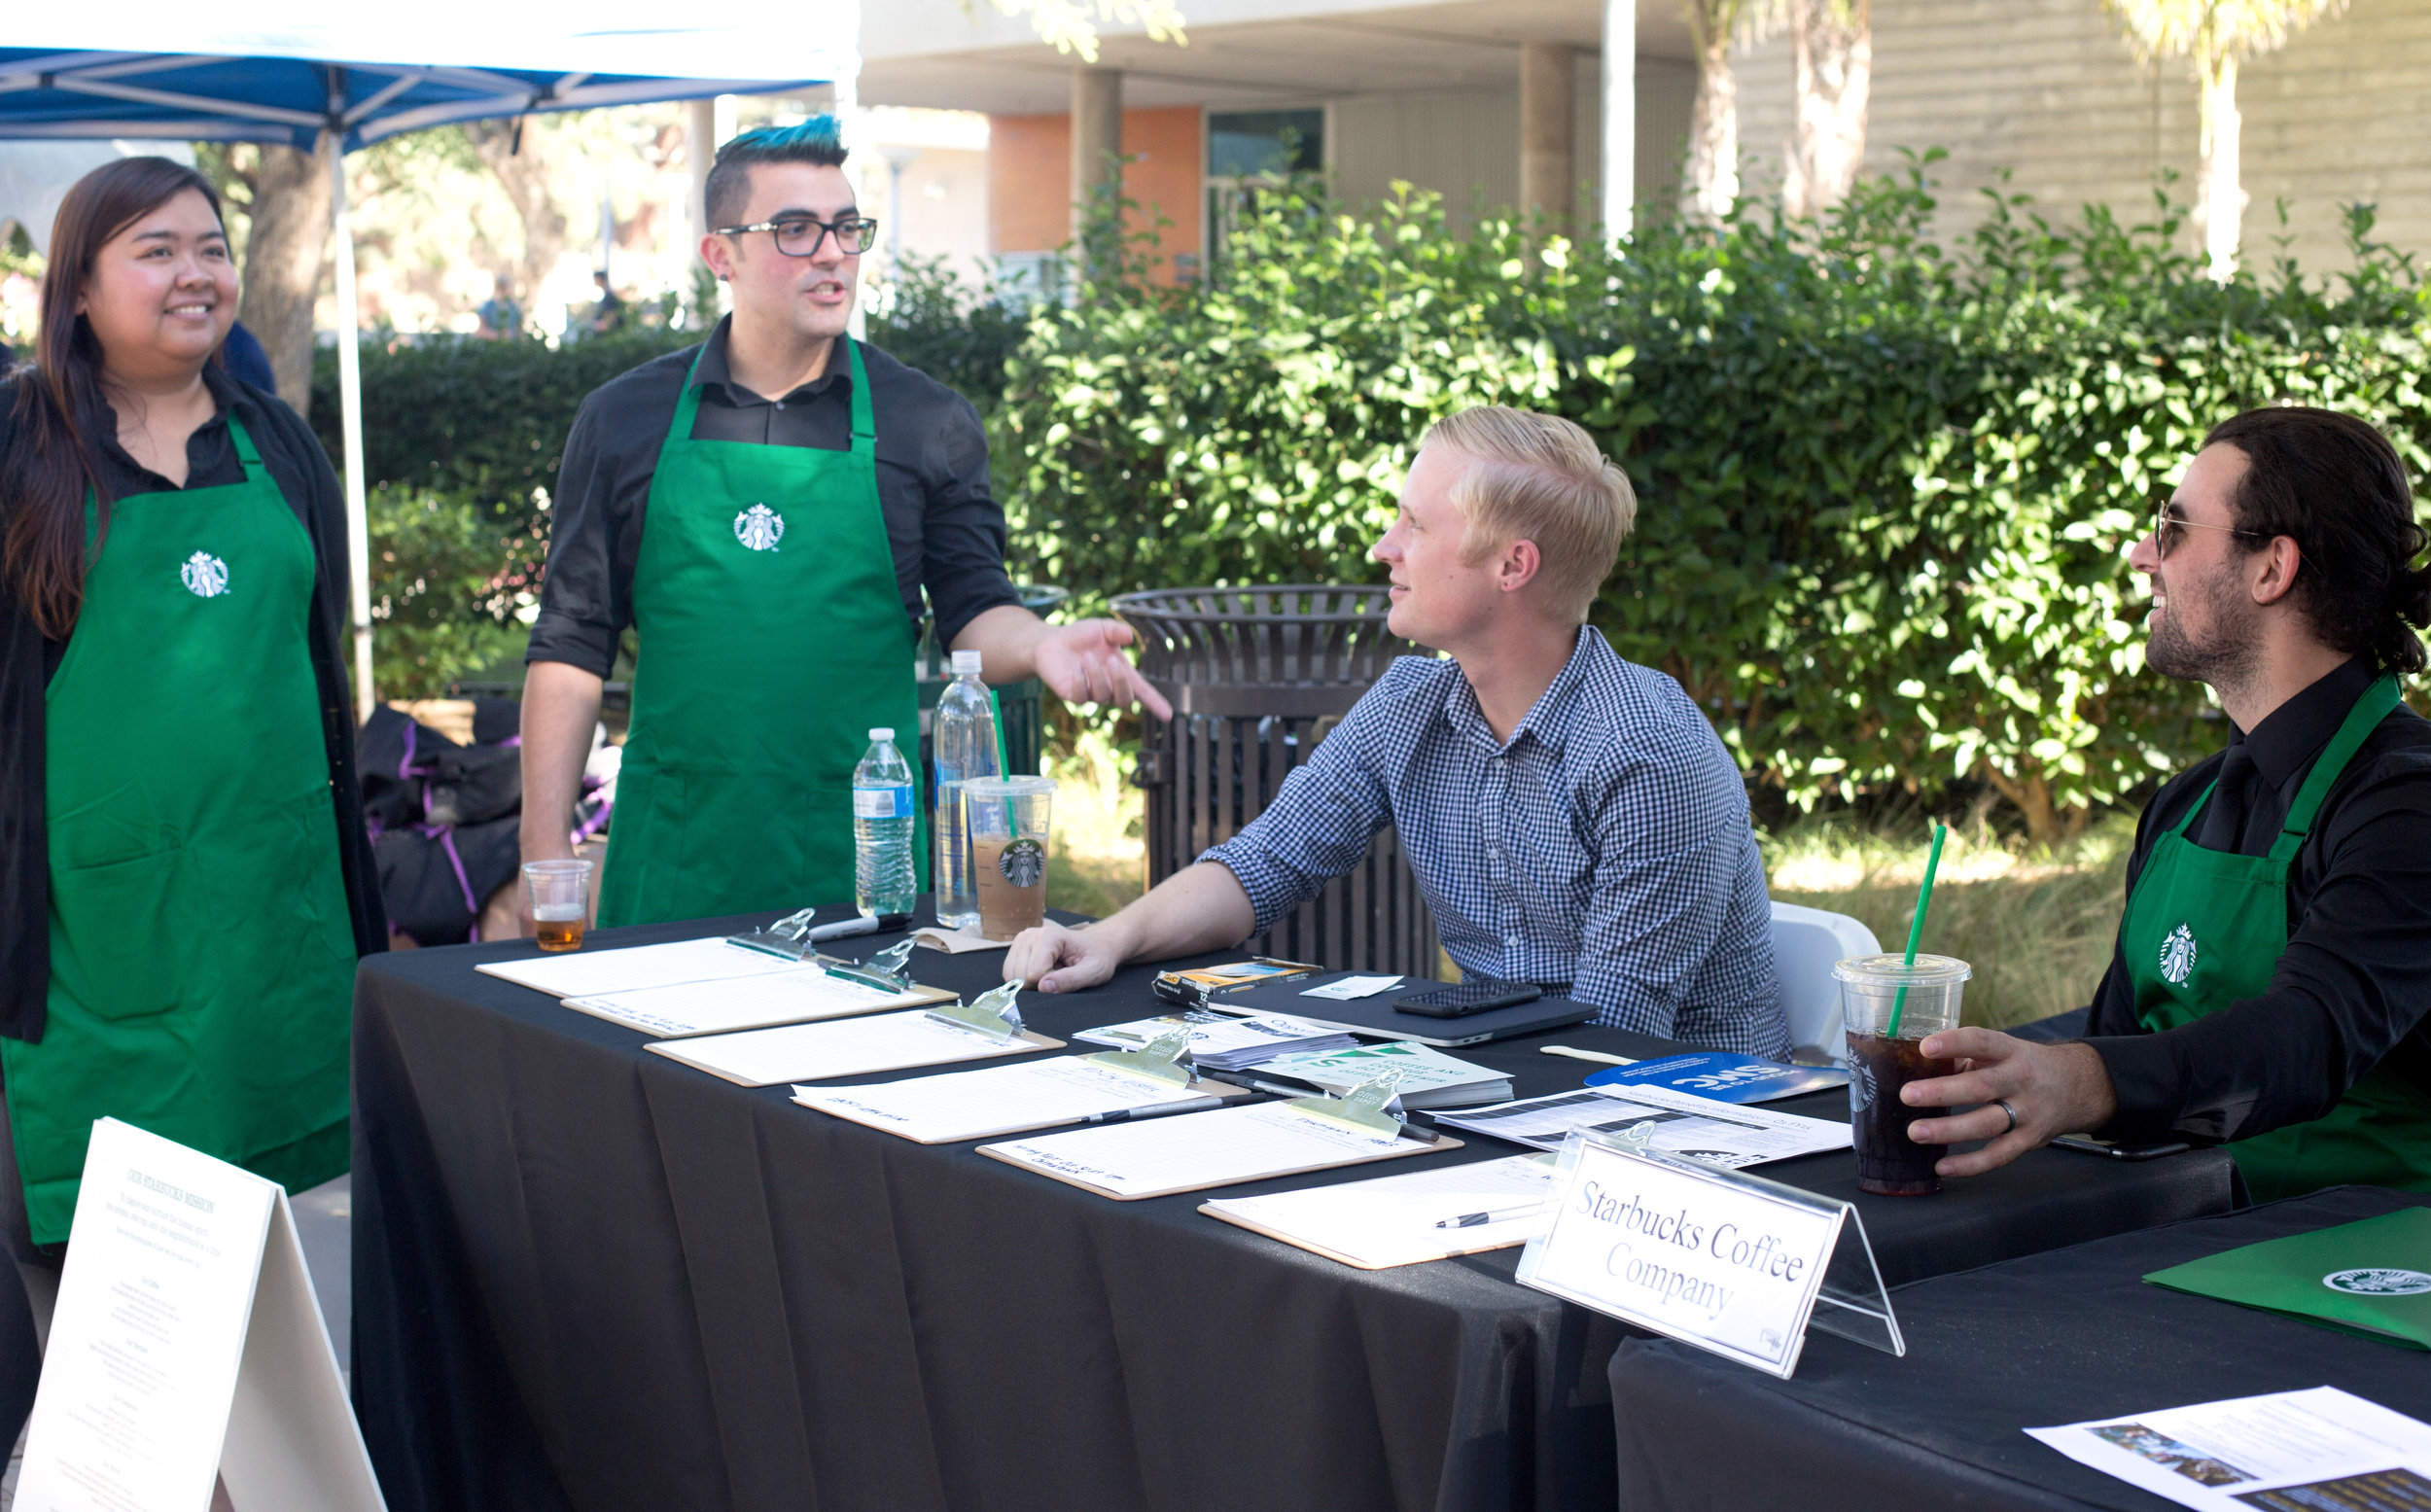  (L to R) Starbucks Store Managers Carla Henriquez and Vincent Perez at the Starbucks employment booth with District Manager August Anderson and Store Manager Jarrod Jacobus scouting for friendly faces in the student population at the Job Fair in San